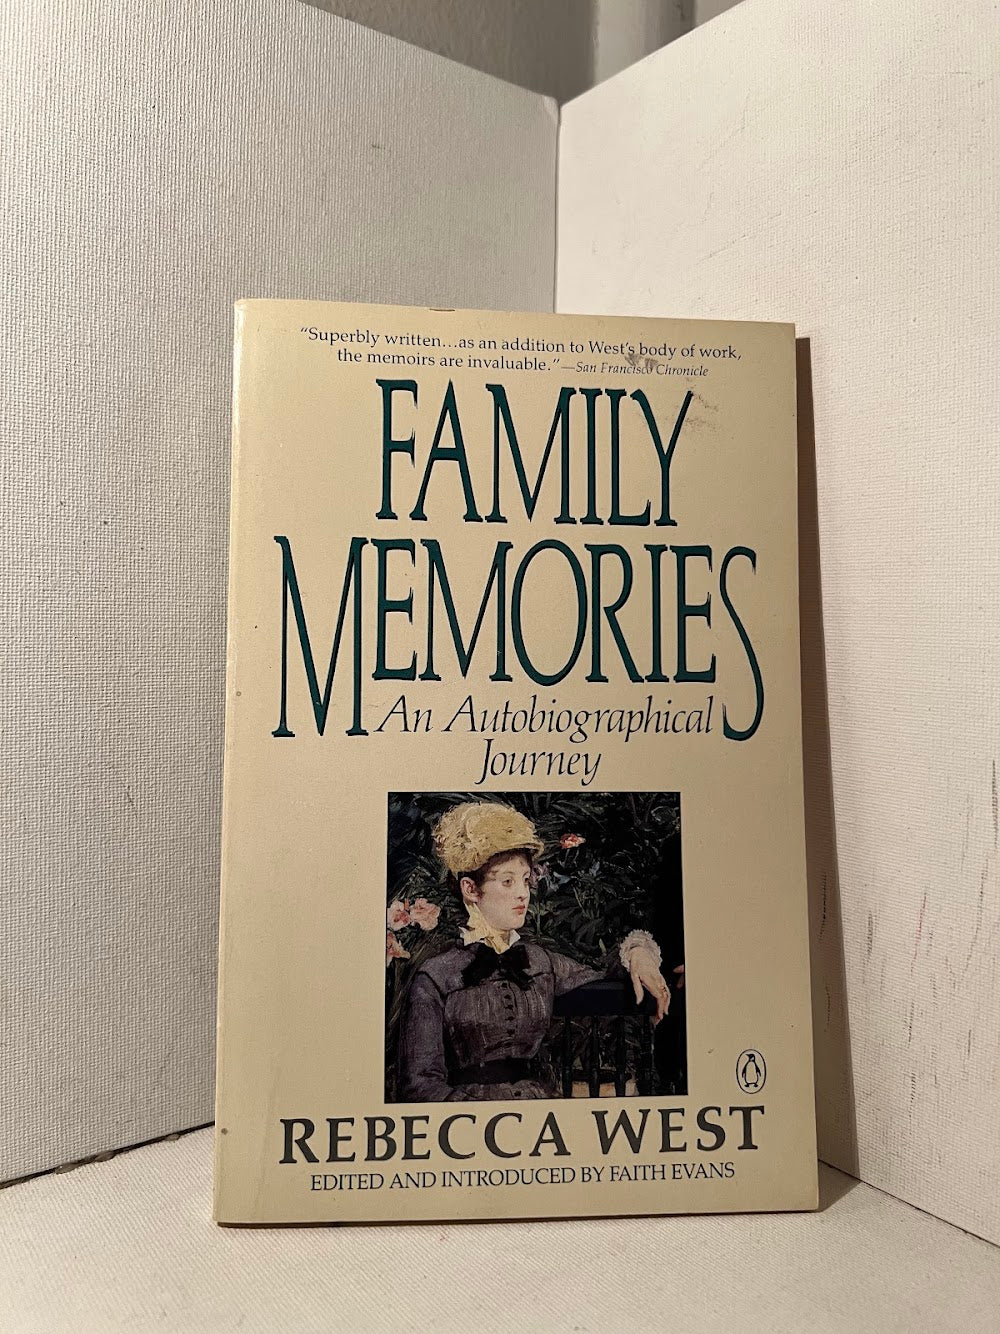 Family Memories by Rebecca West